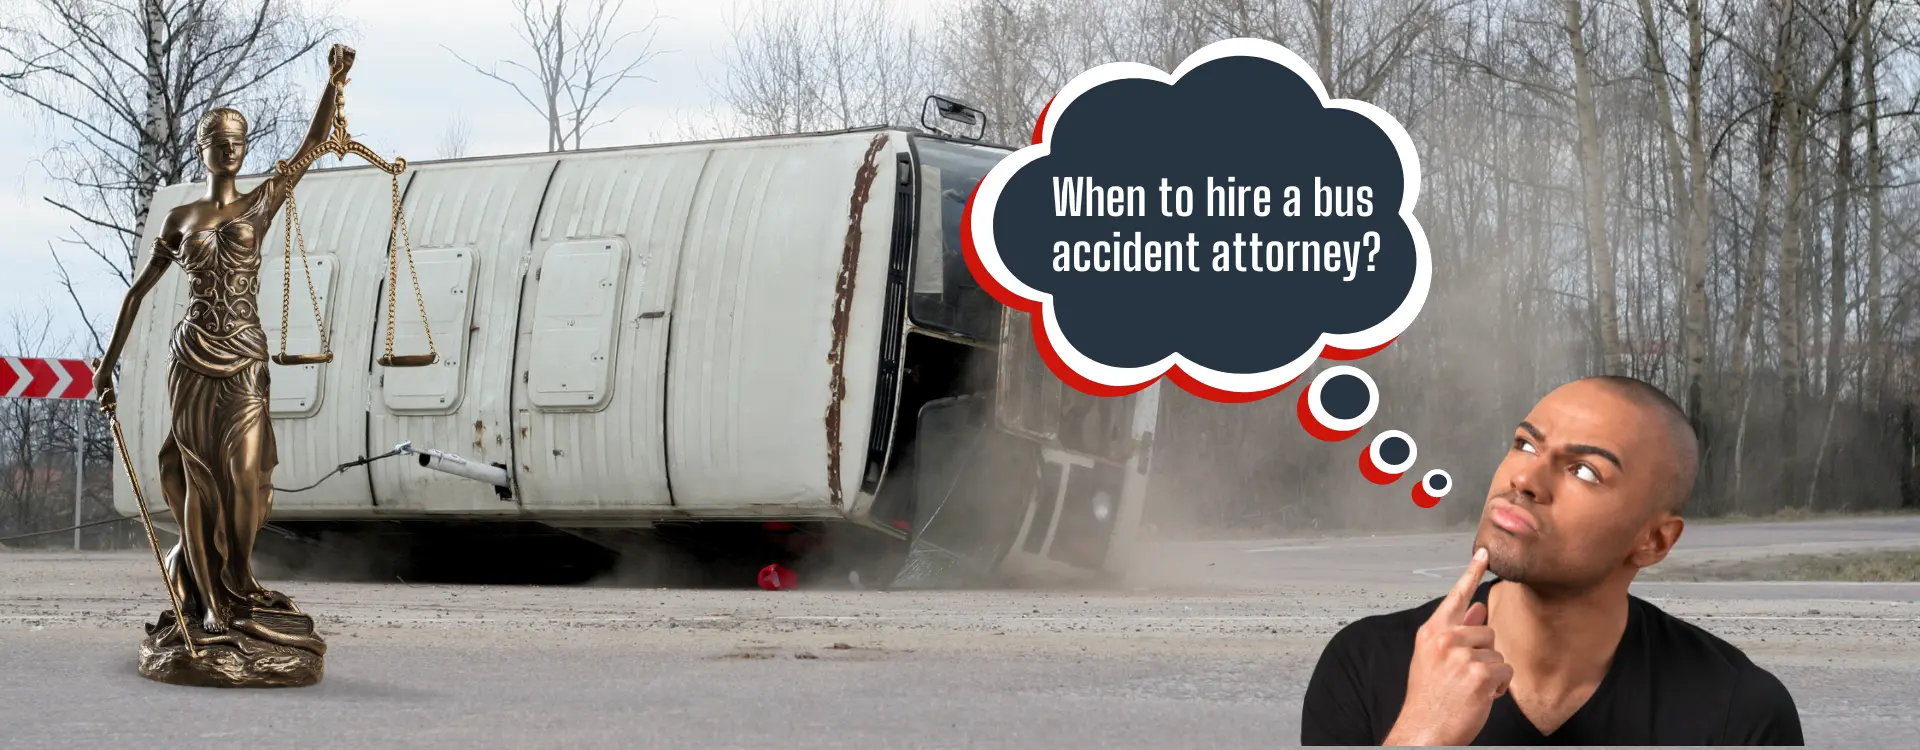 when to hire a bus accident attorney